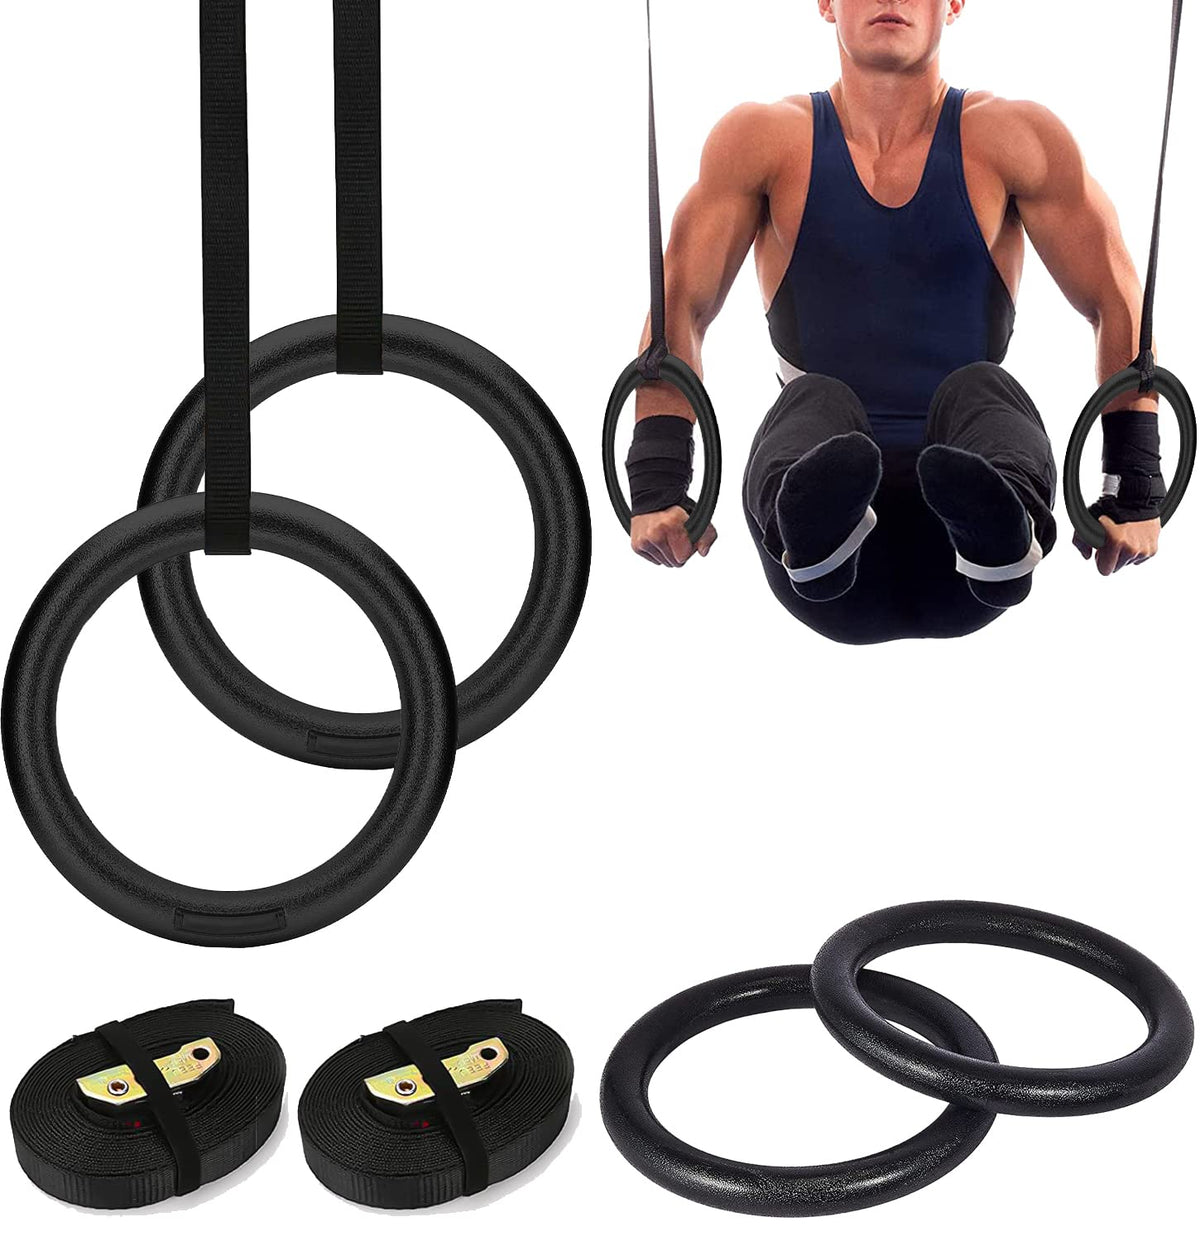 Strauss ABS Gymnastics Ring Set | Heavy Duty Adjustable Straps for Cross-fit & Strength Training | Gym Rings for Bodyweight Exercises | Ideal for Pull-Ups, Dips, and Muscle Building,(Black)